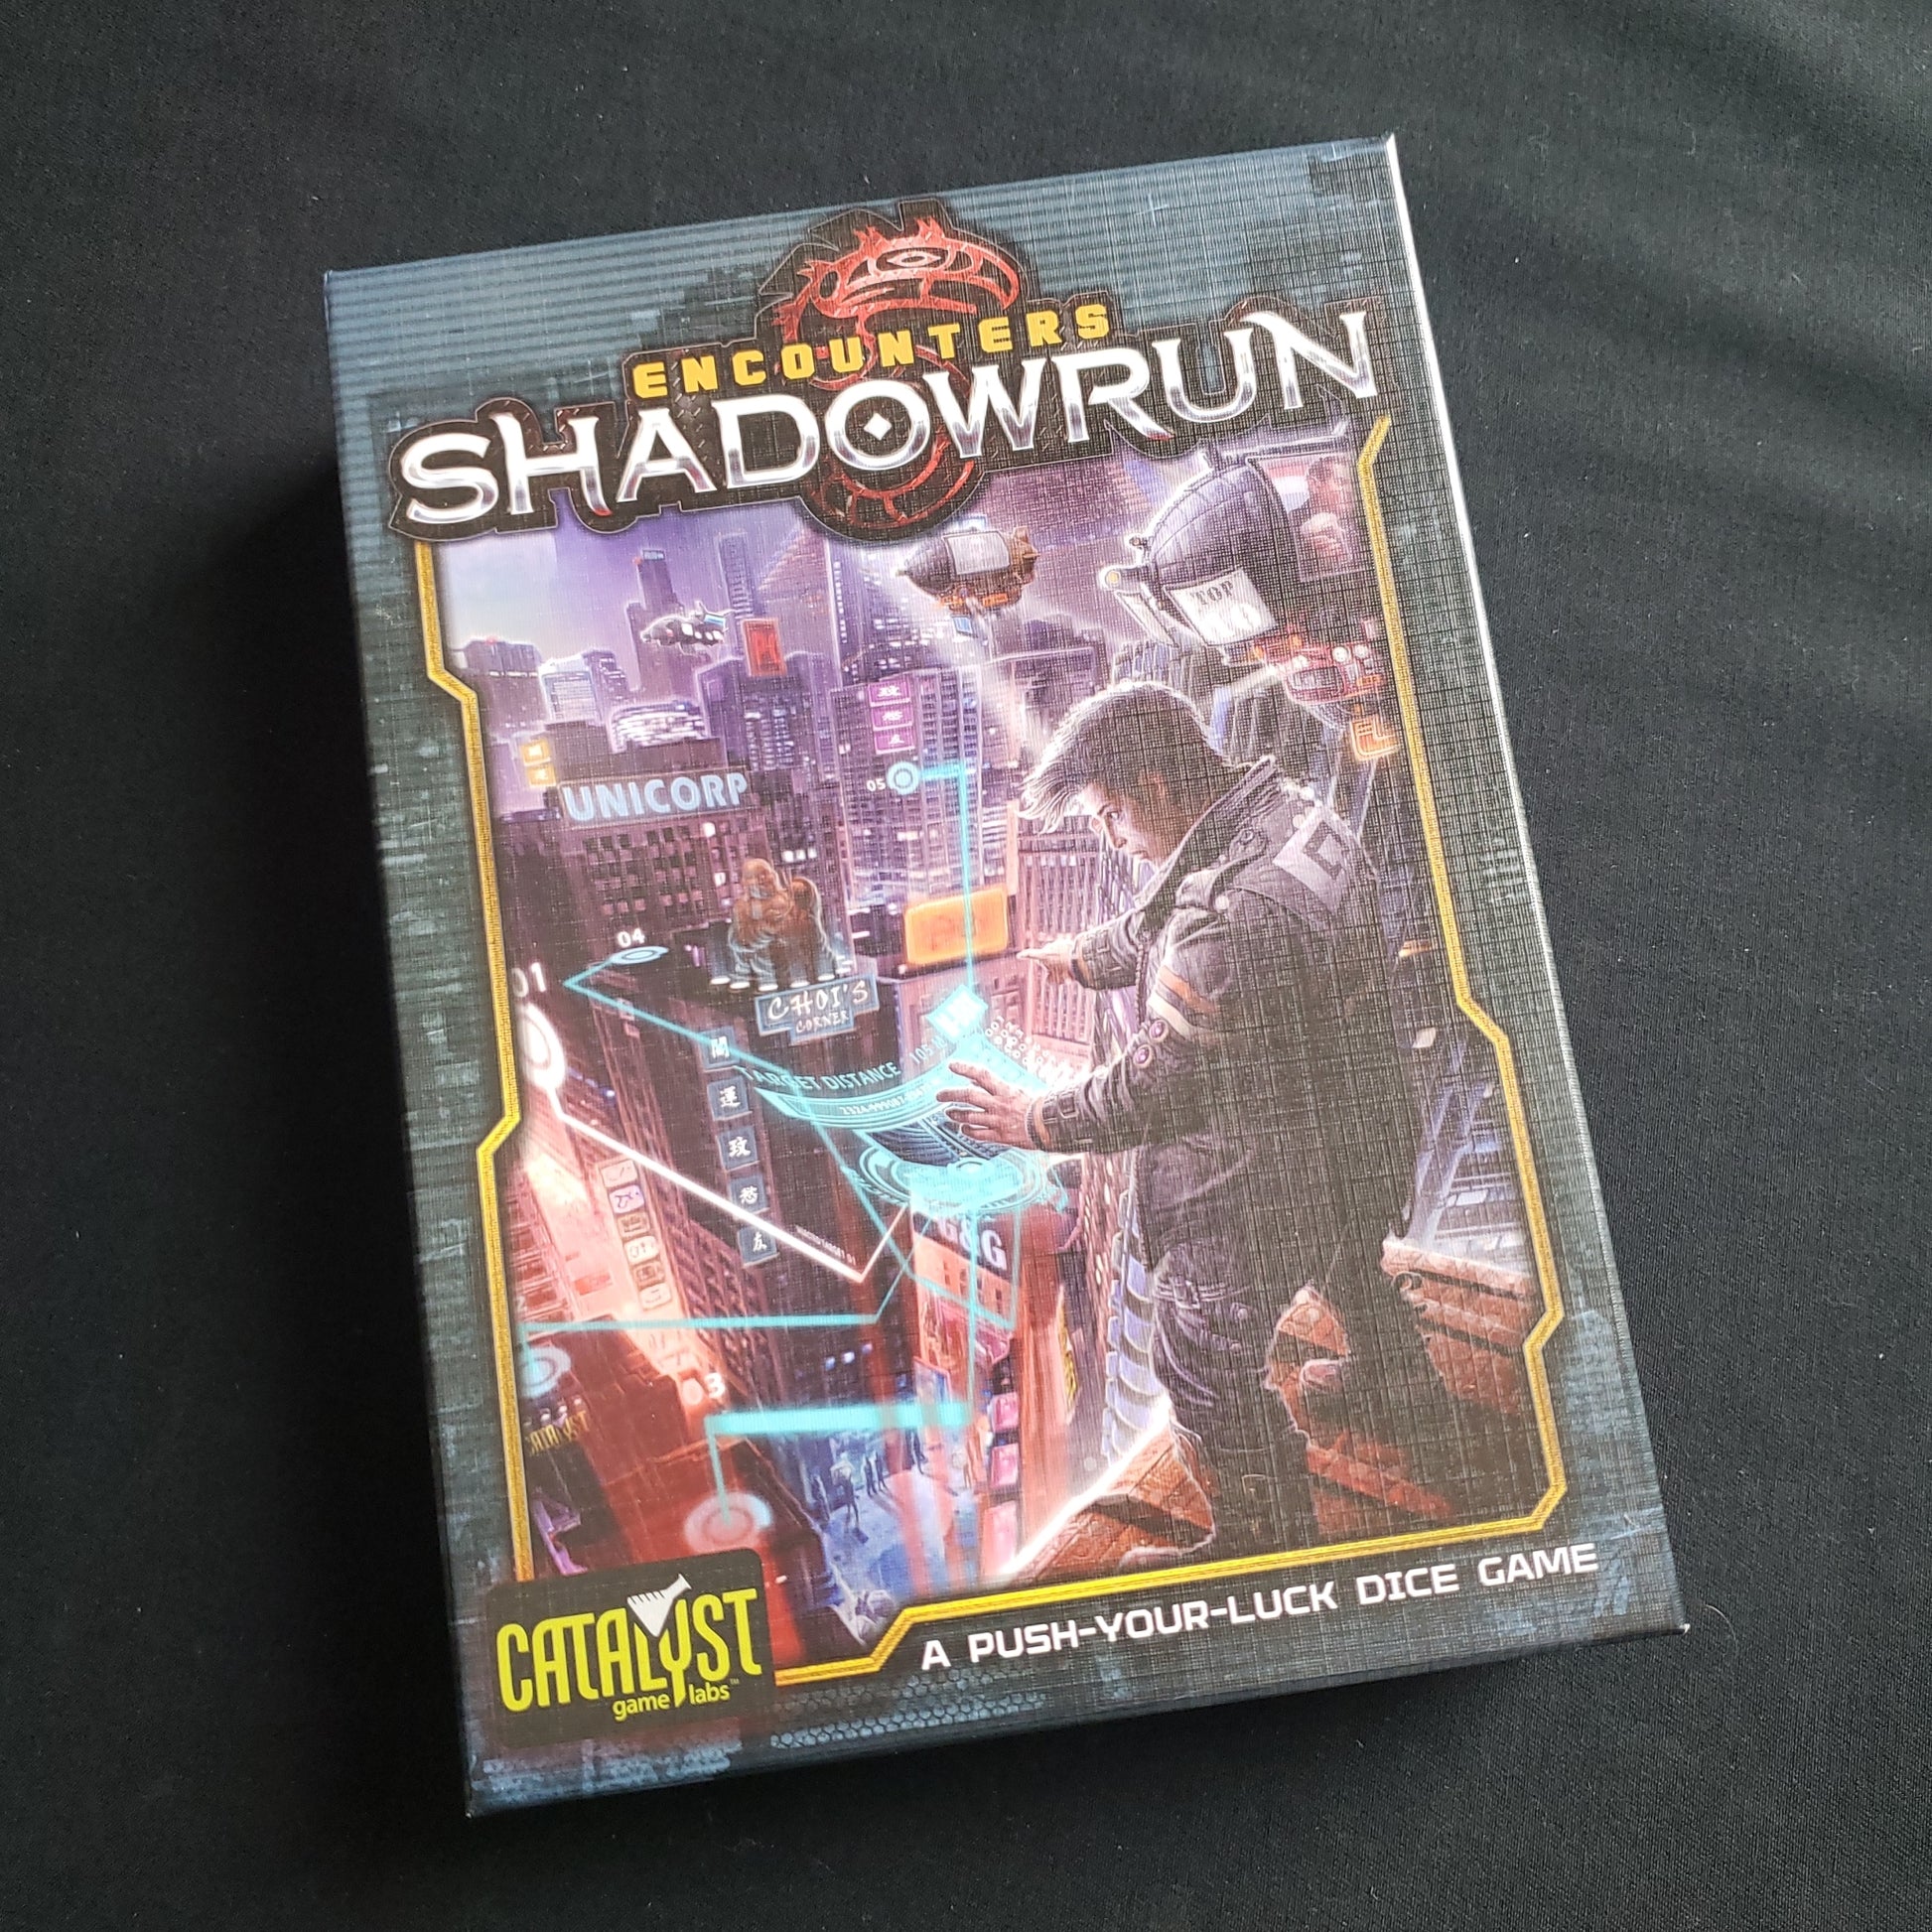 Image shows the front cover of the box of the Encounters: Shadowrun board game